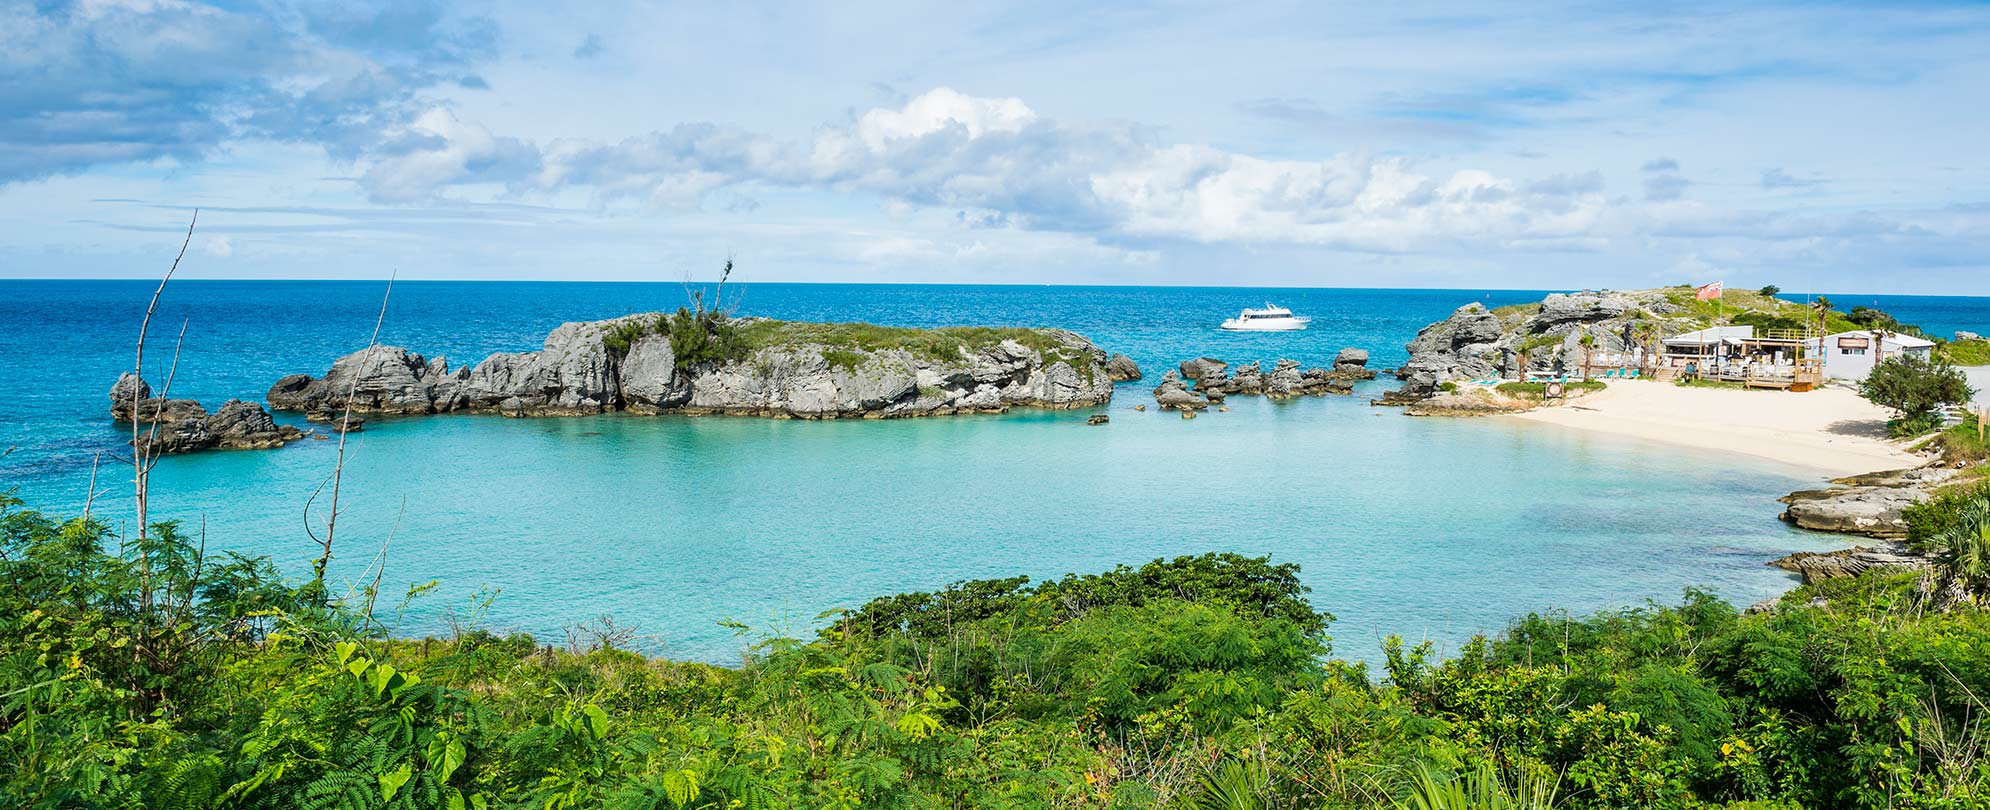 Beach destination with clear water surrounded by rocks and plants in Bermuda. 